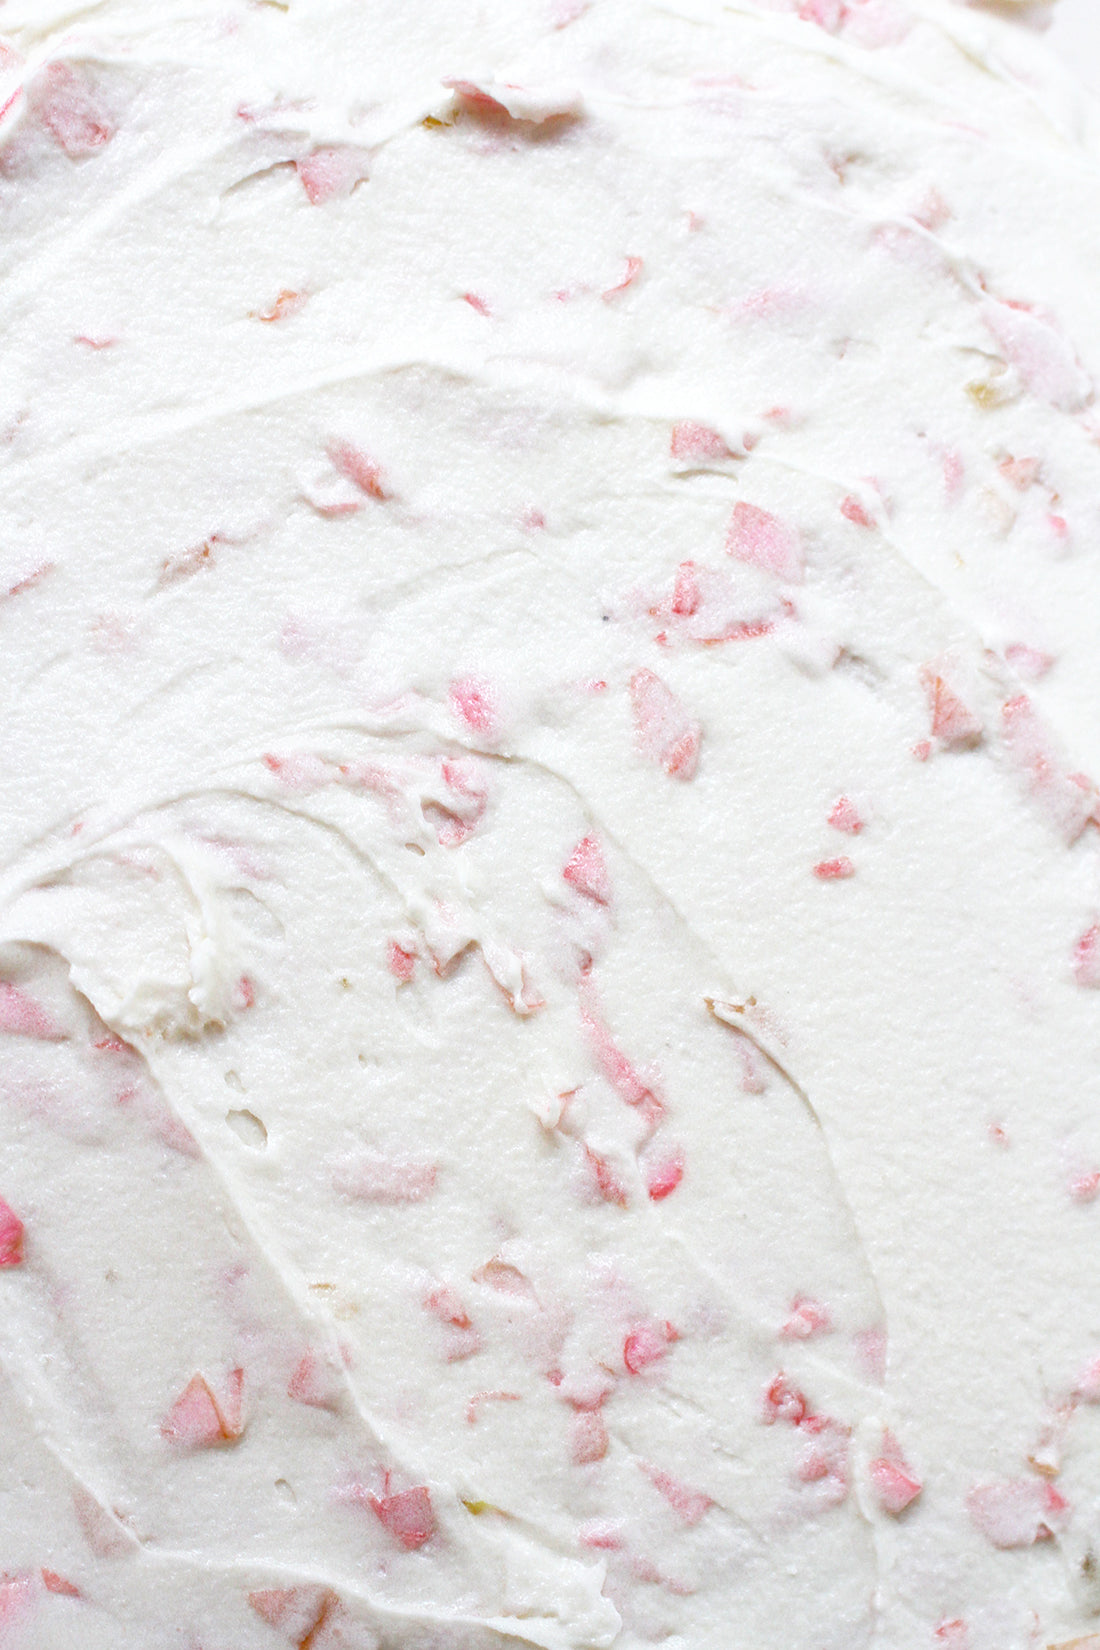 Close up image of rose petals in frosting for Miss Jones Baking Co Rosé All Day Rose Cake